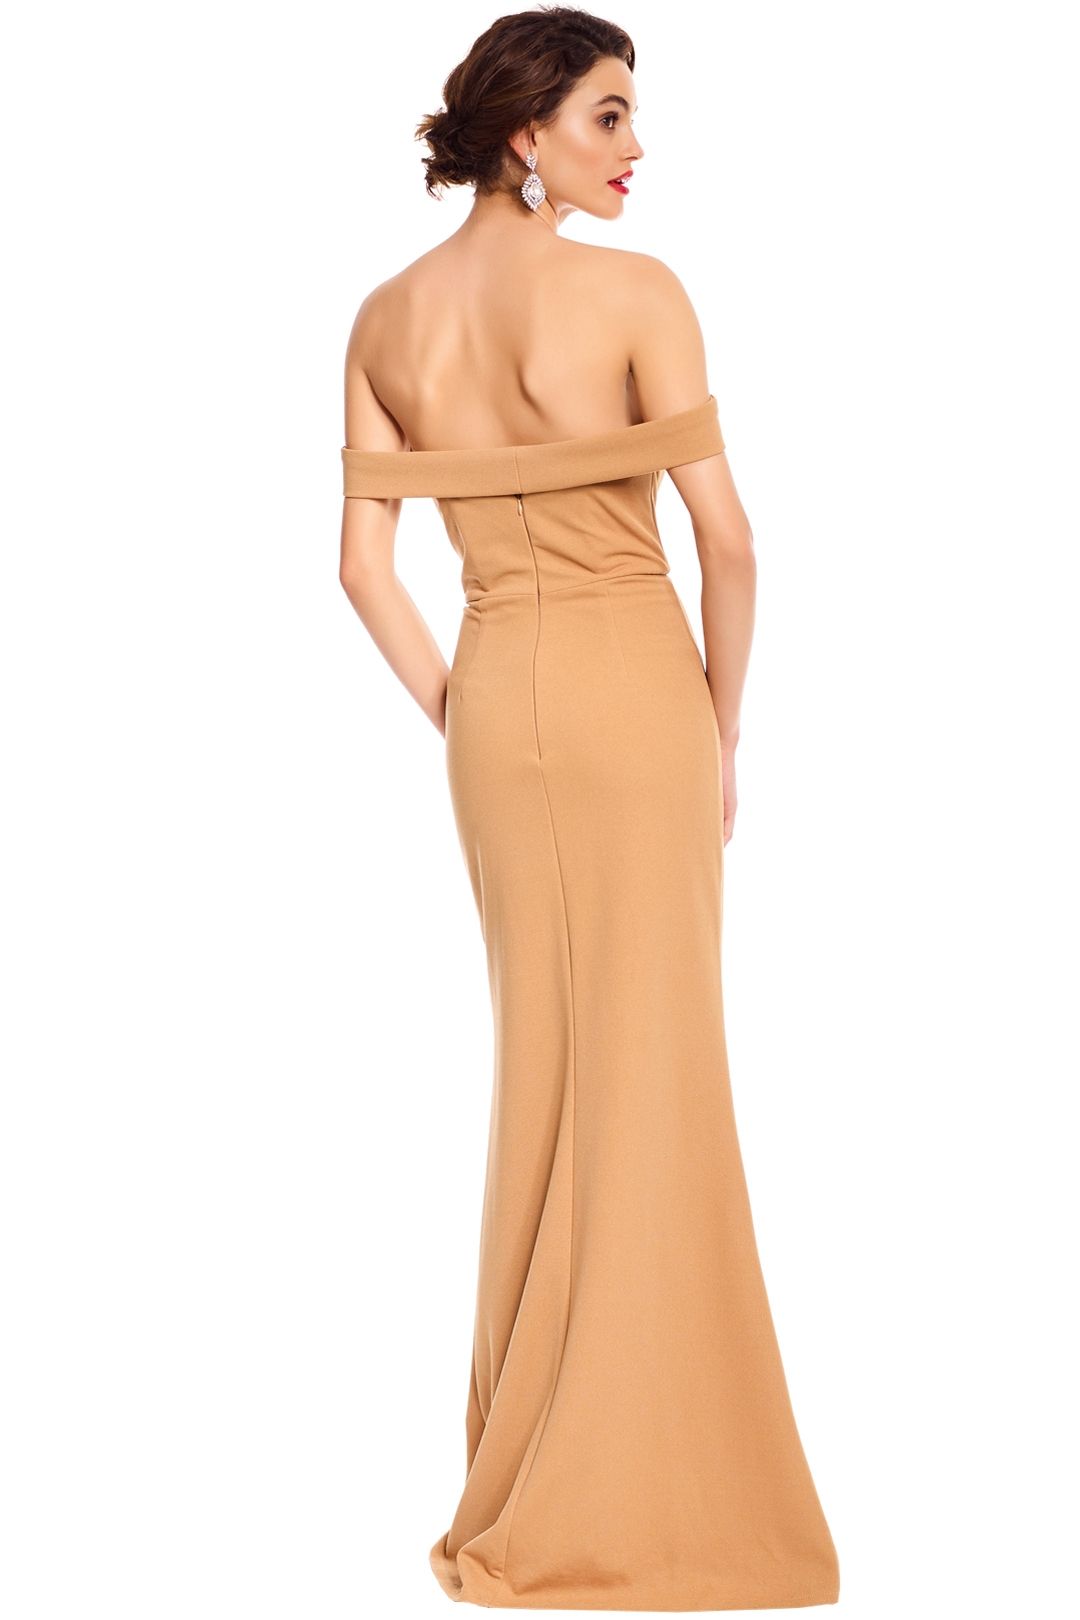 George - Lola Gown - Nude - Back